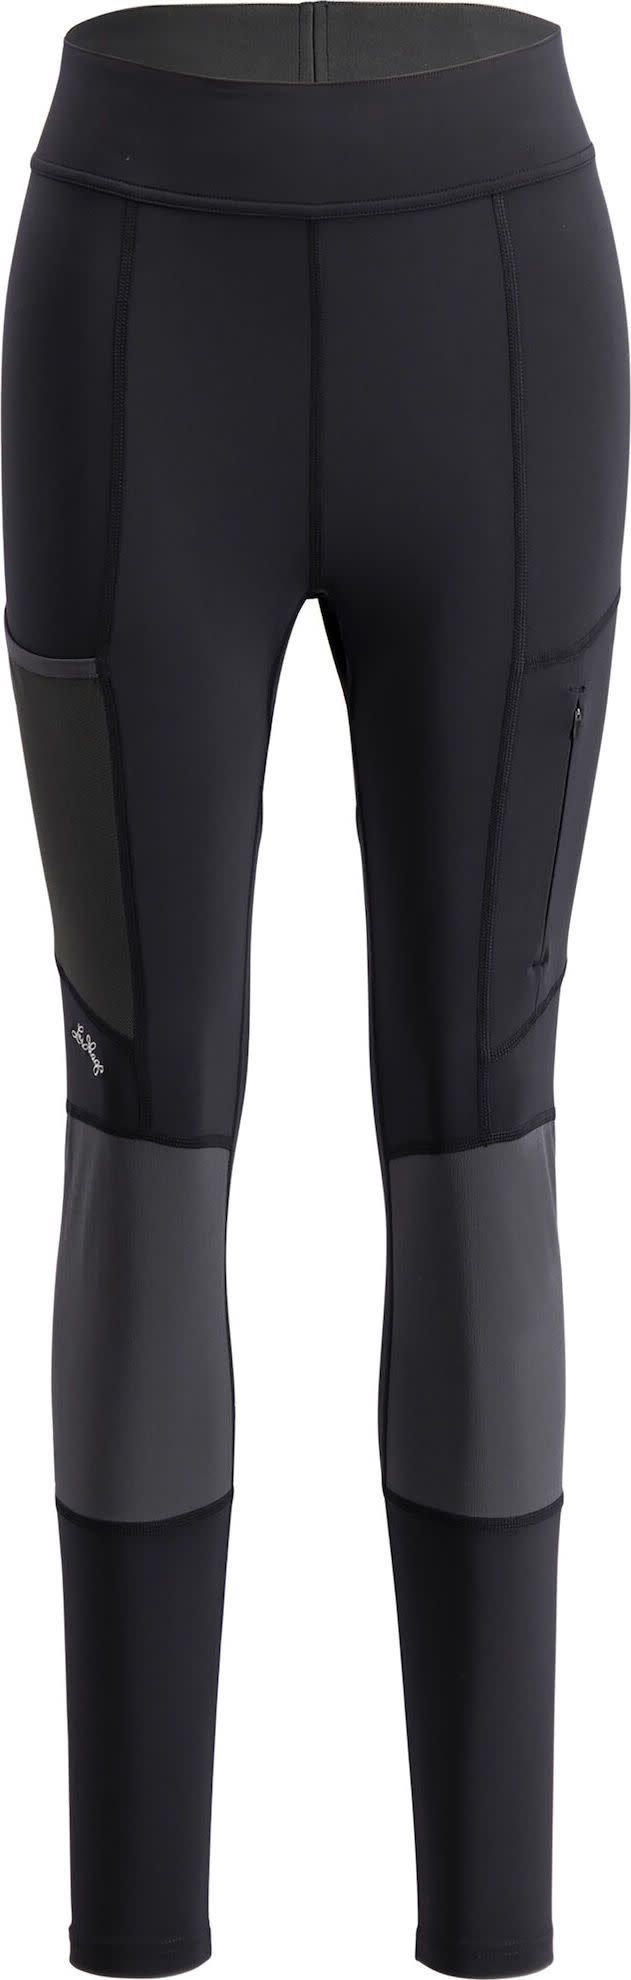 Lundhags Women's Tived Tights Black/Charcoal Lundhags